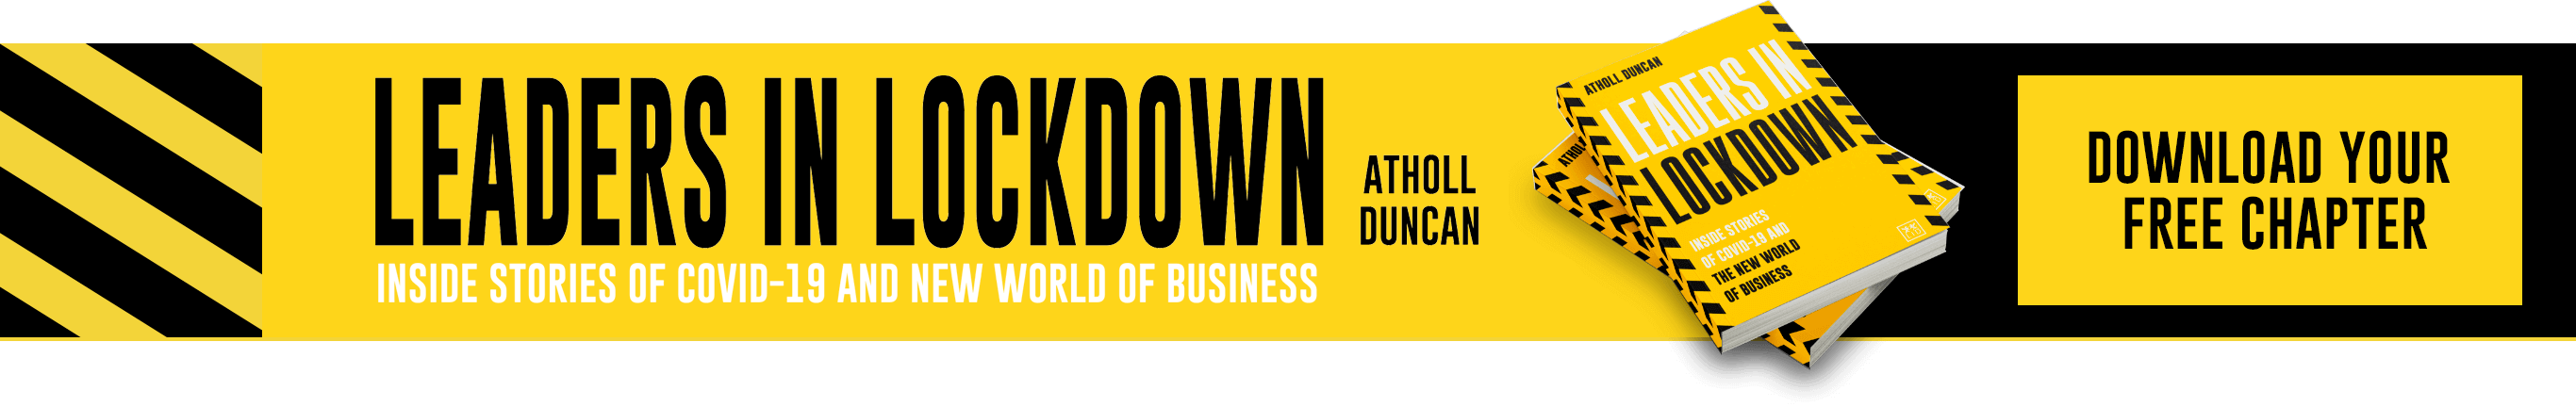 Leaders in Lockdown by Atholl Duncan - Inside stories of COVID 19 and new world of business